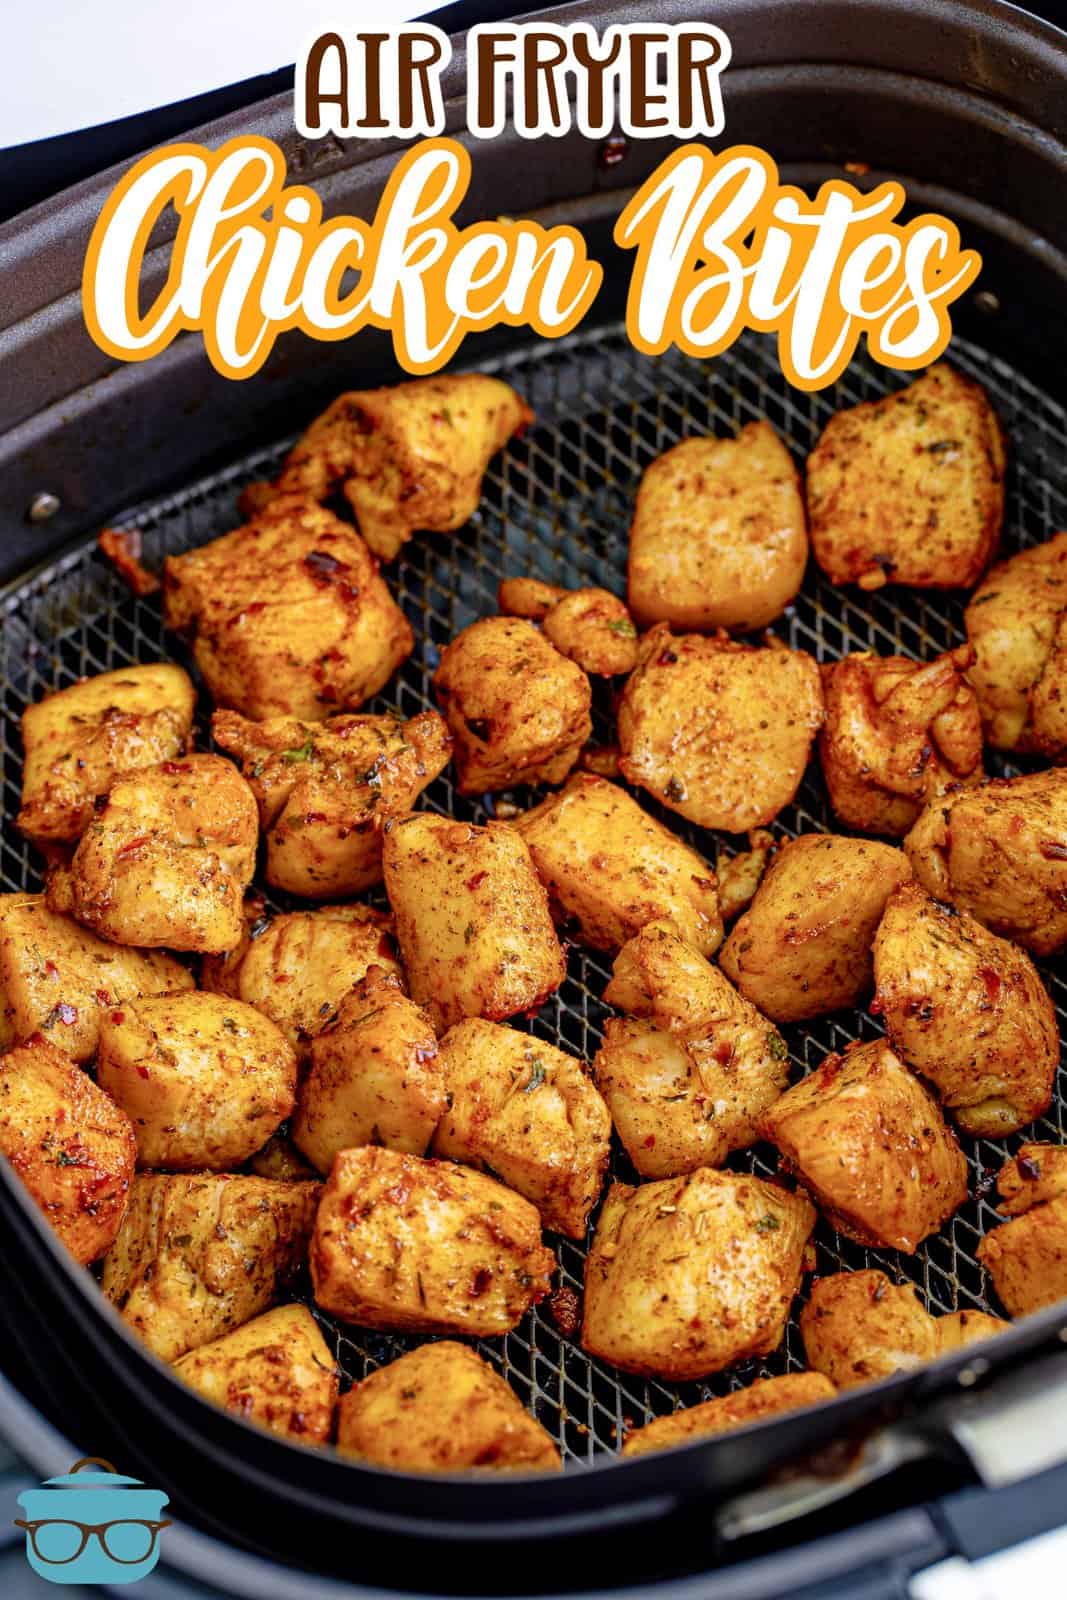 Fully cooked and seasoned chicken breast bites shown in a black air fryer basket. 